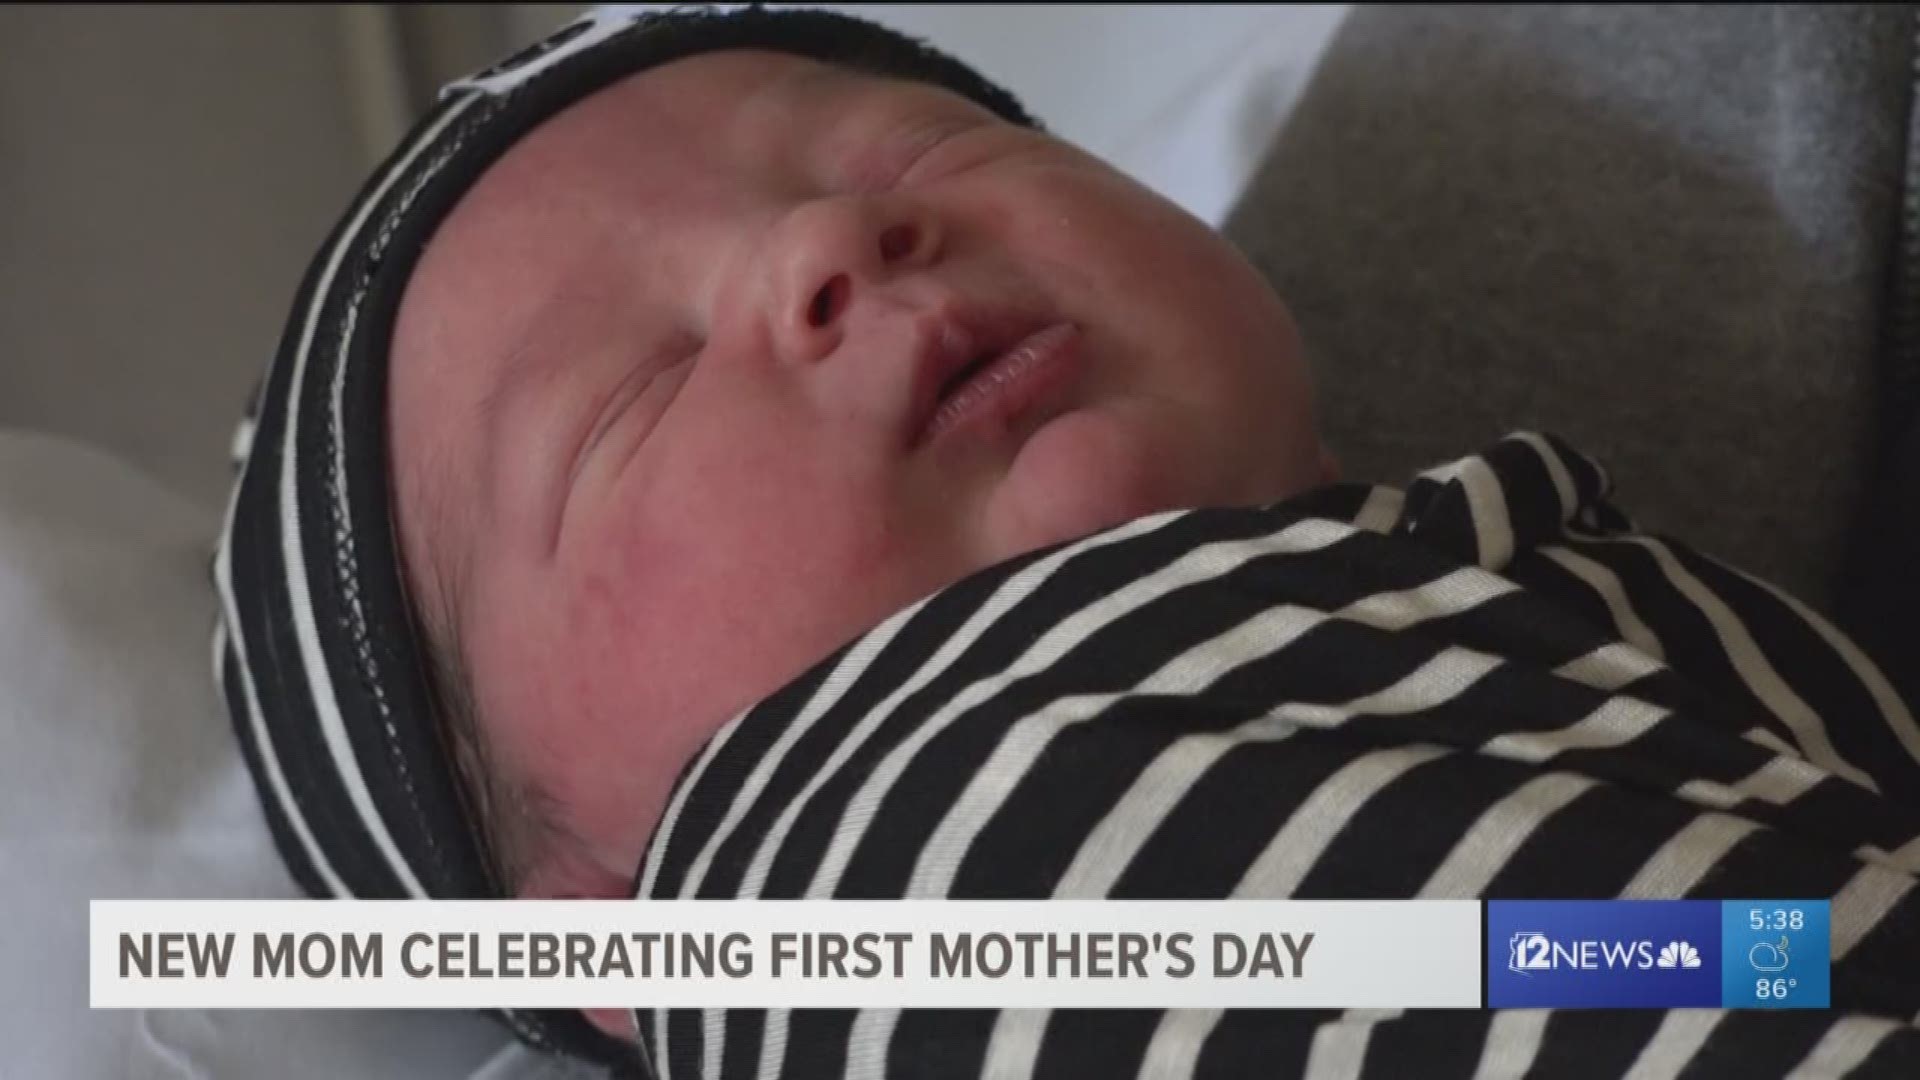 A Tempe couple welcomed a baby boy early Sunday morning at Banner Desert Medical Center. And they happily introduced baby Henry Graham to 12 News.